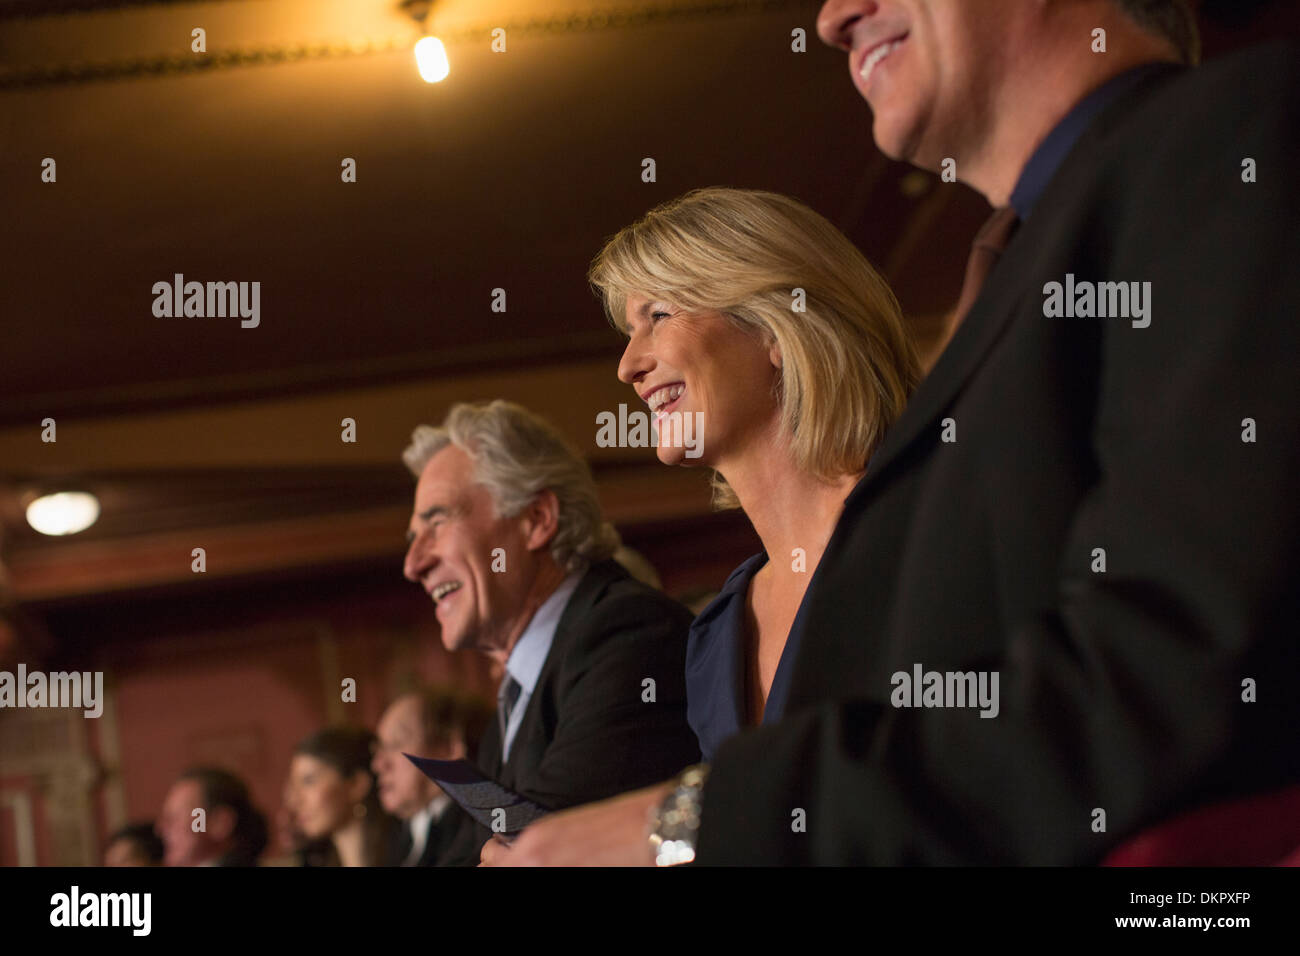 Smiling theater audience Stock Photo